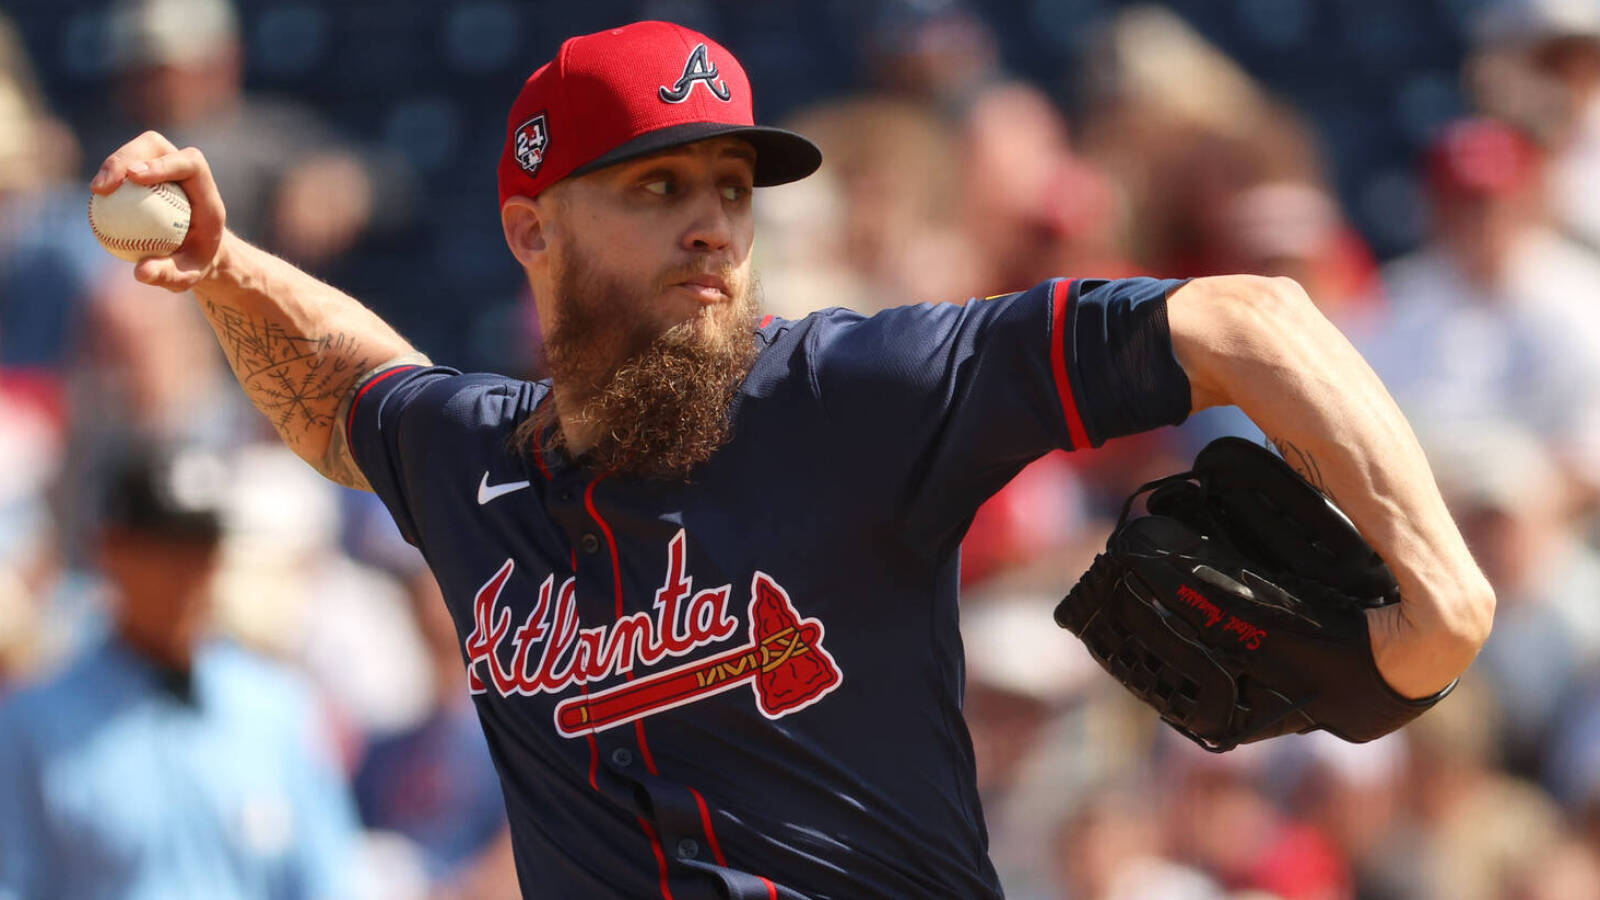 Braves reliever’s unhittable’ pitch makes huge first impression